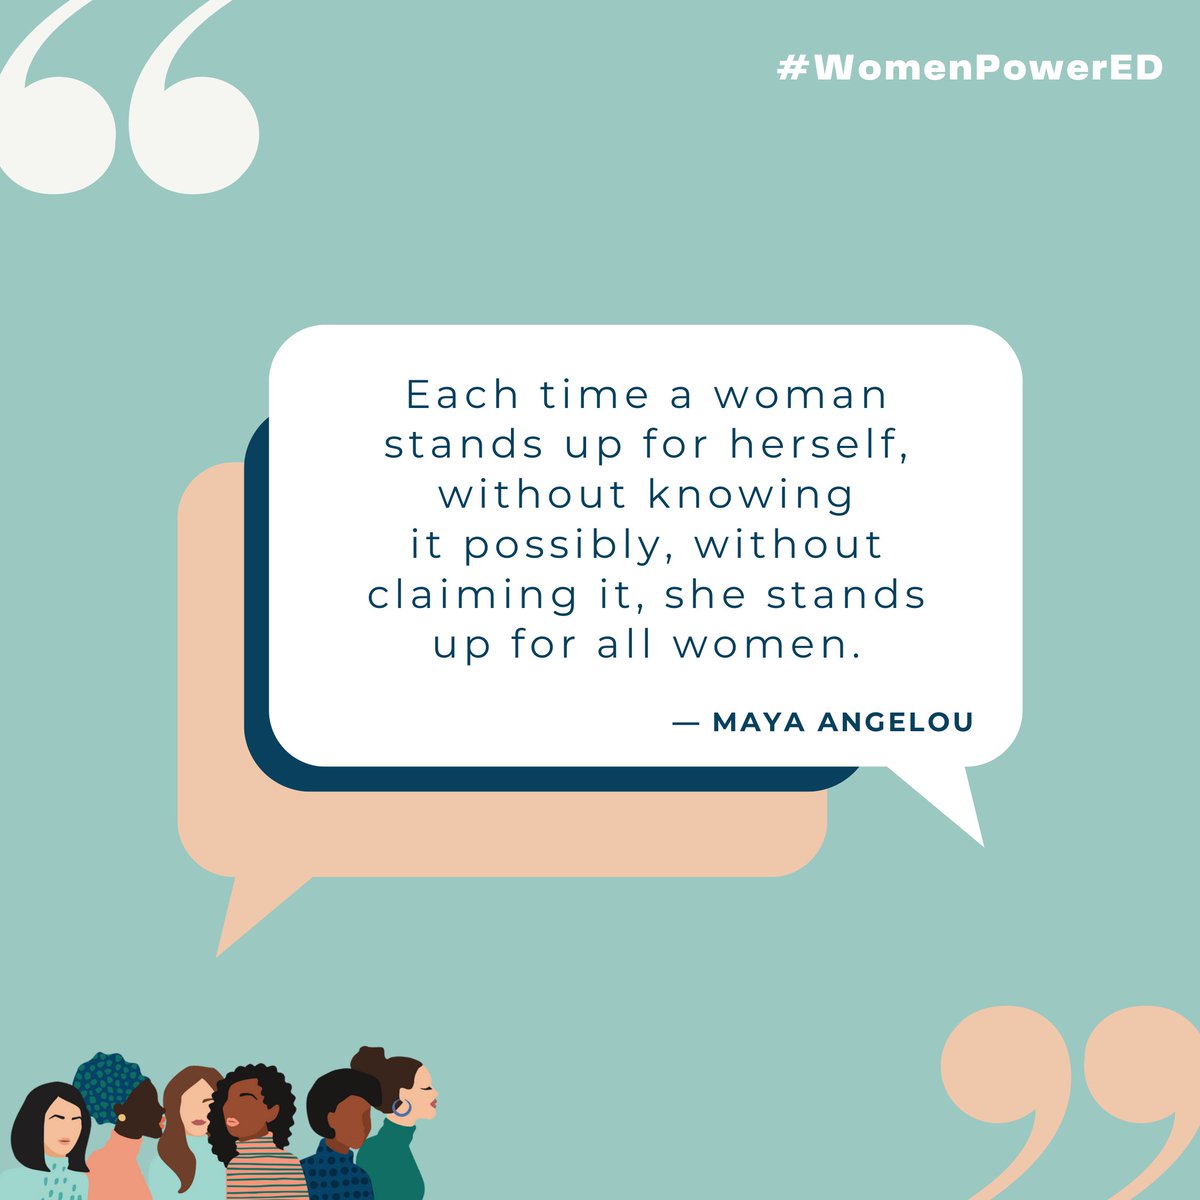 'Each time a woman stands up for herself, without knowing it possibly, without claiming it, she stands up for all women.' — Maya Angelou On #InternationalWomensDay & #WomensHistoryMonth, we celebrate the heroines of our past, the powerful leaders in our present & future.